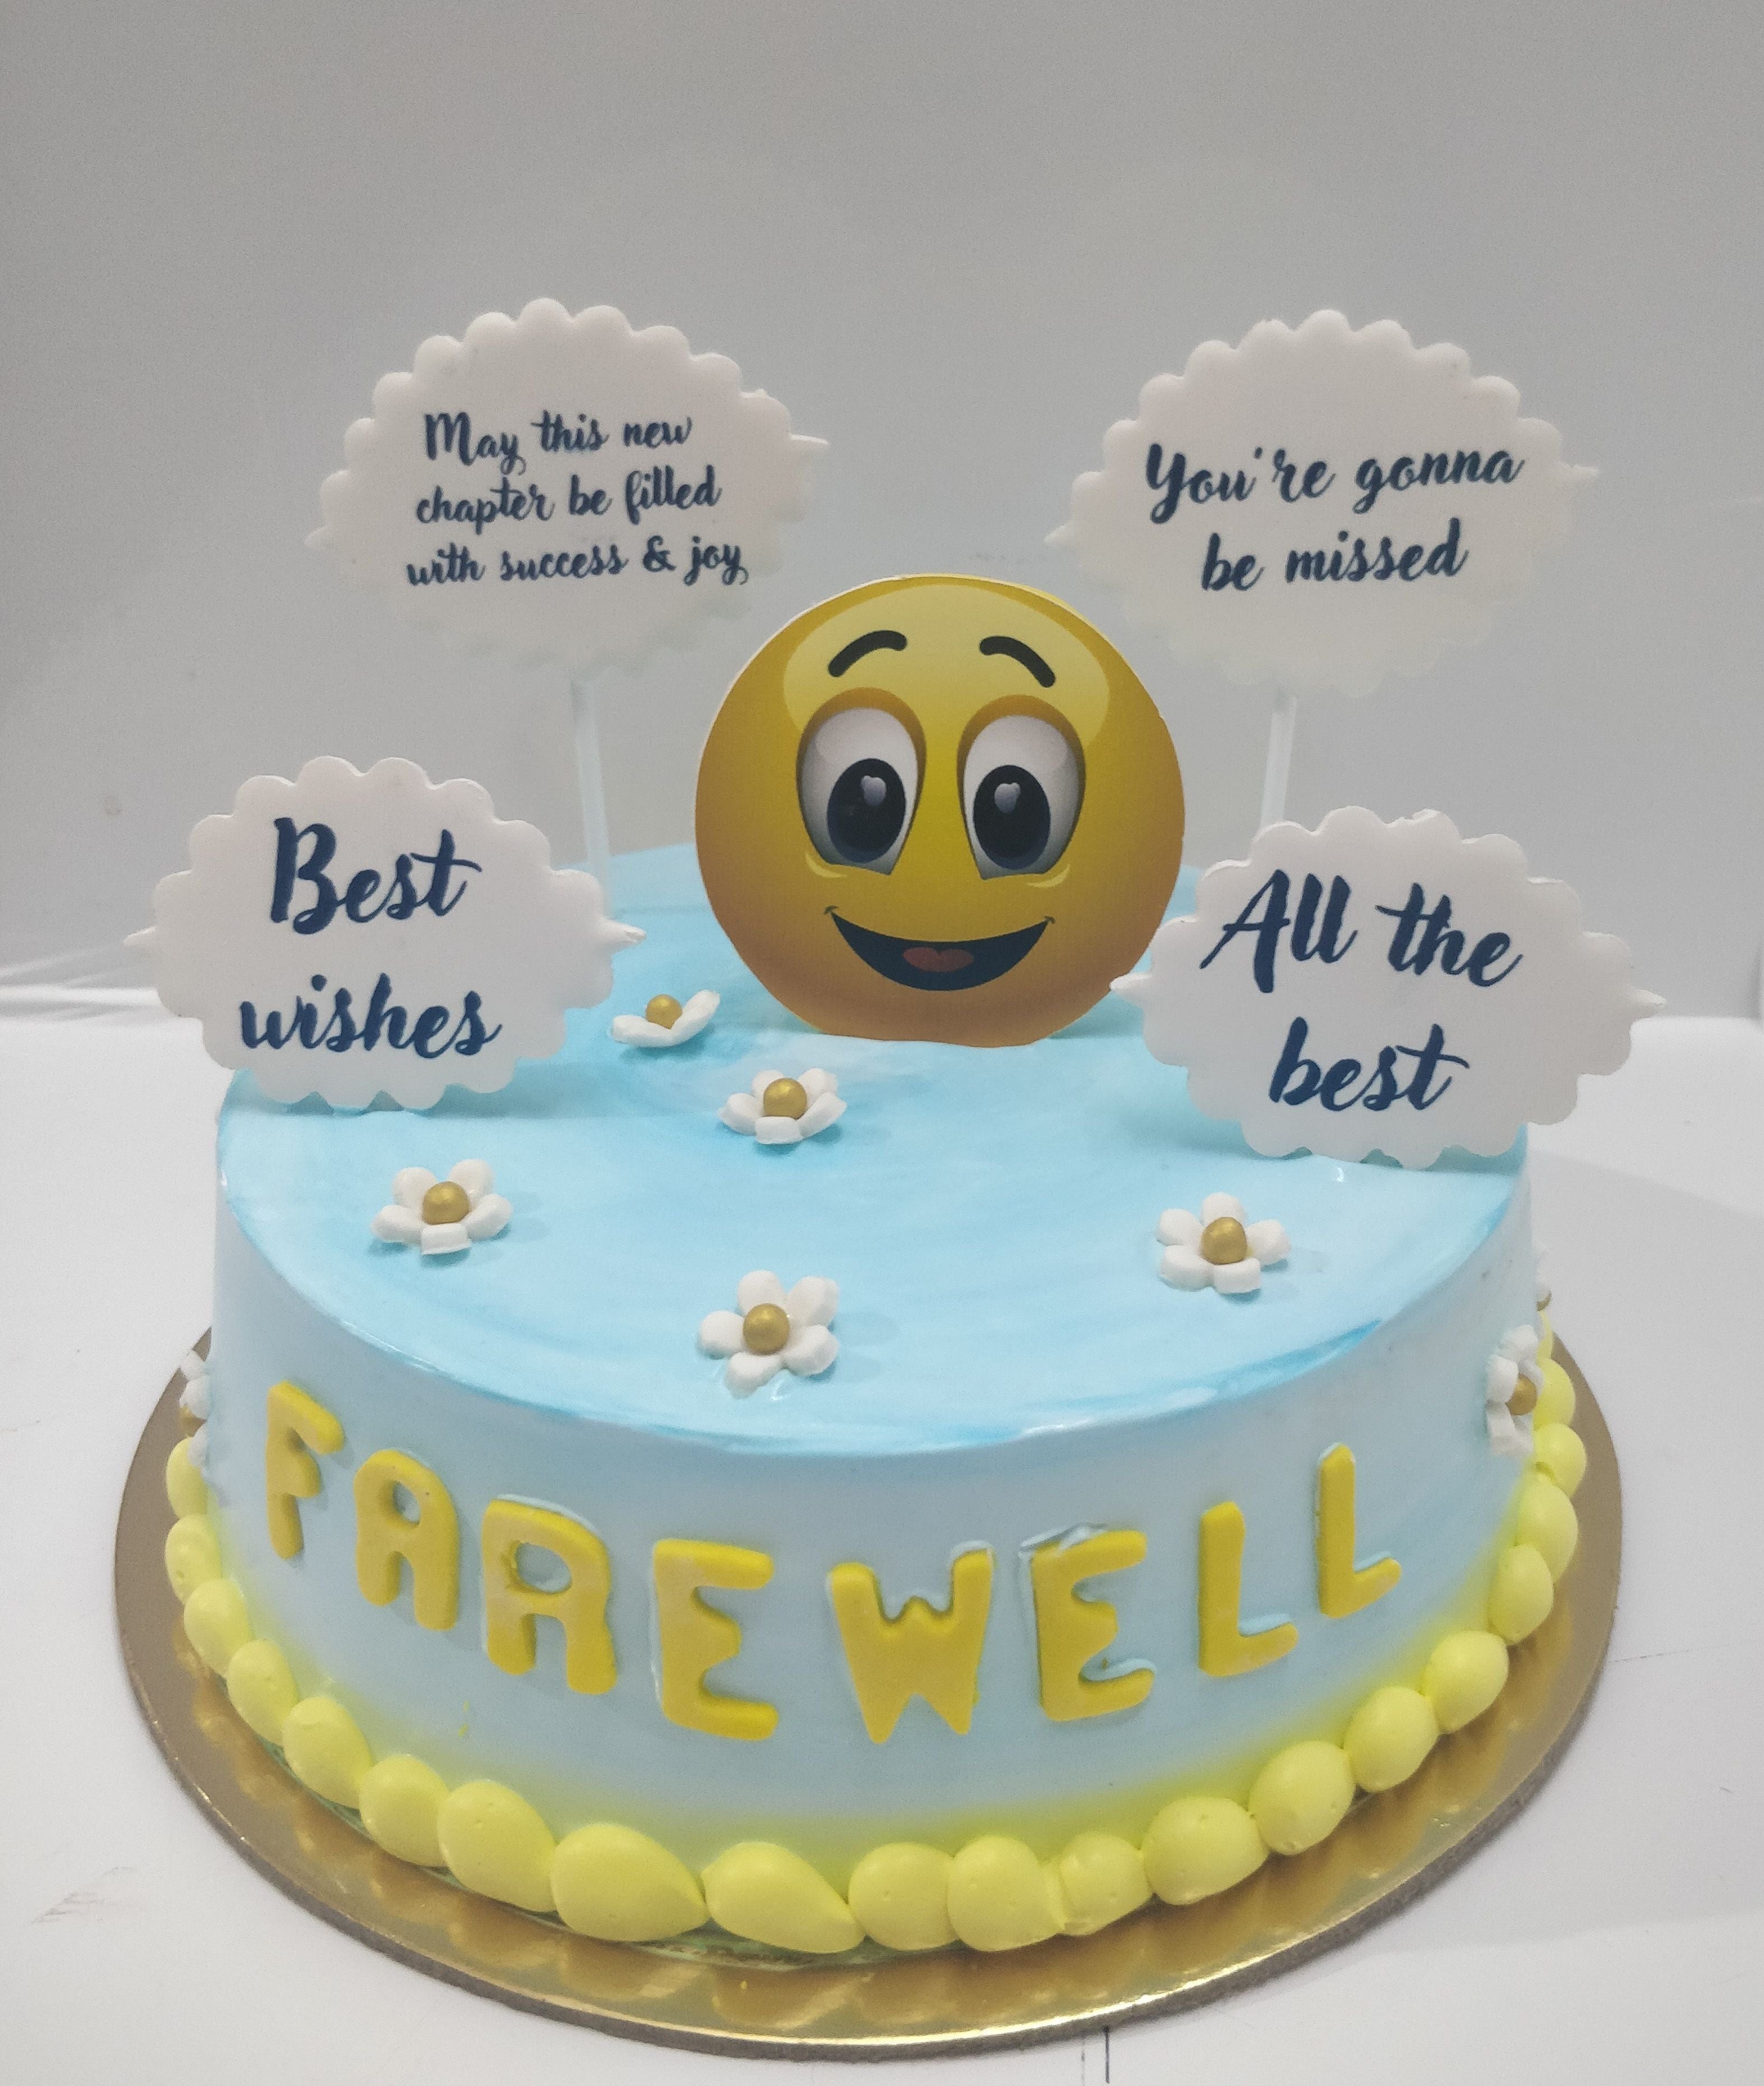 30 Funny Farewell Cakes That Employees Received On Their Final Day Of Work